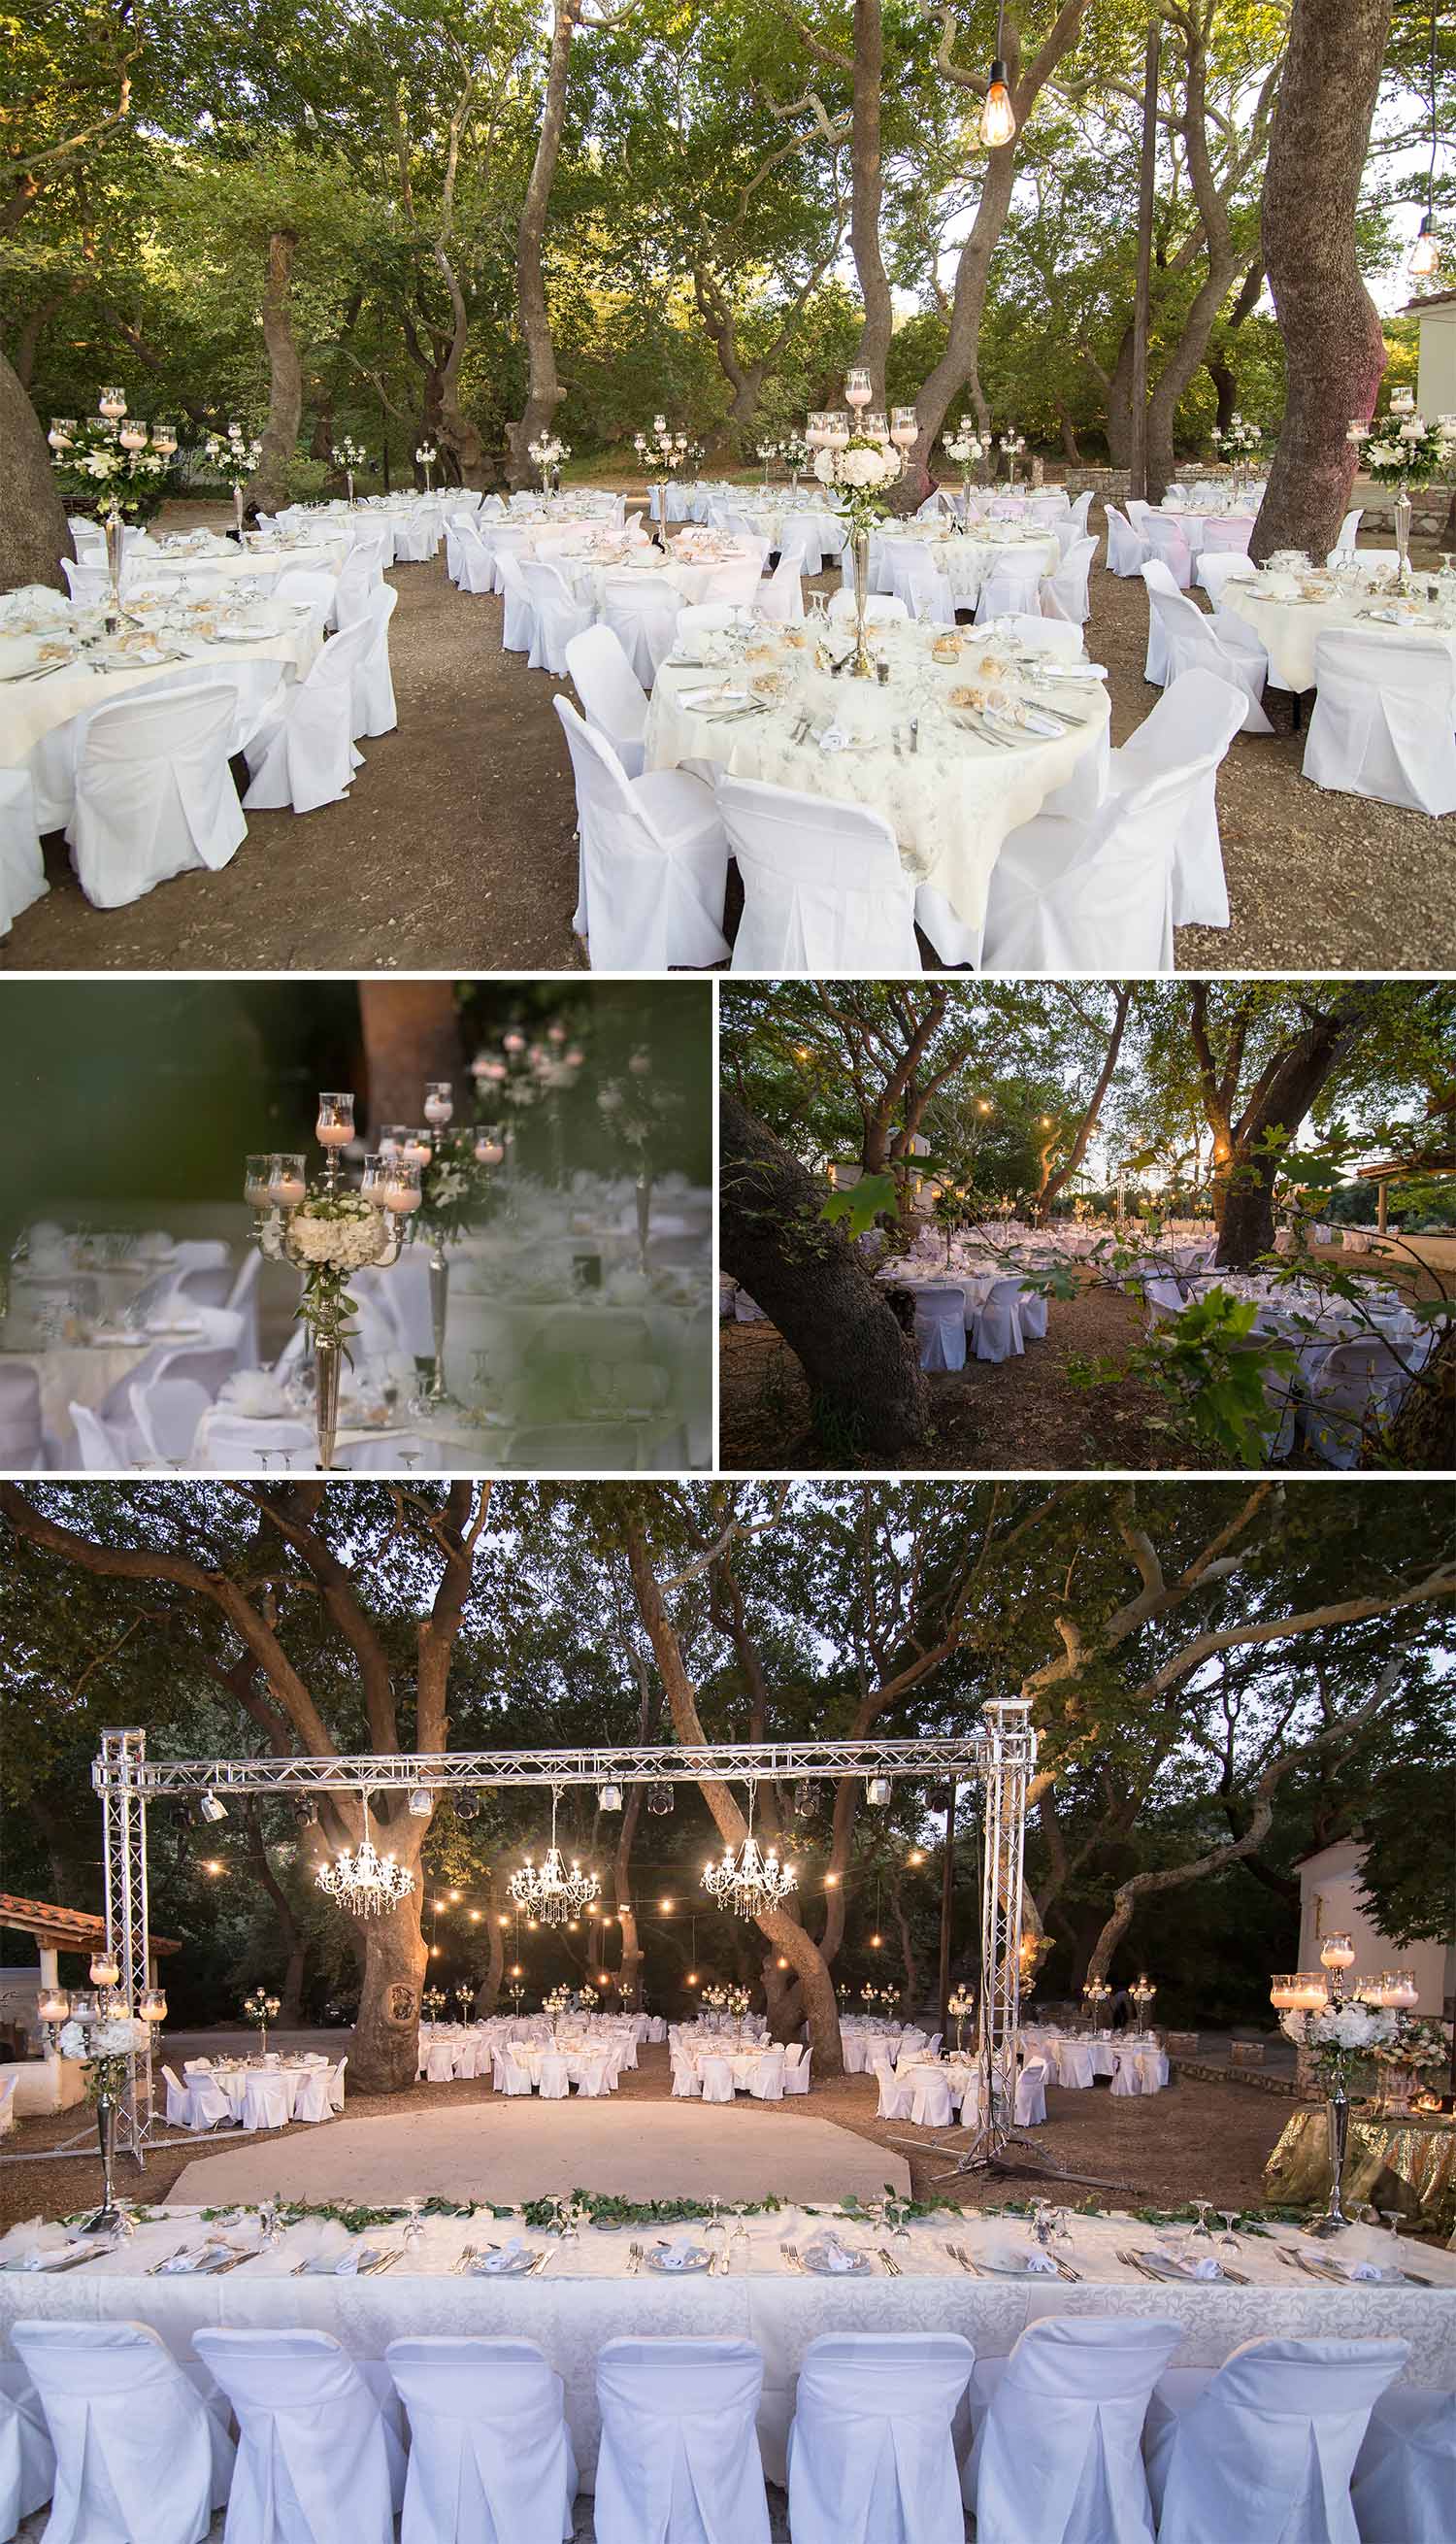 A-magical-wedding-in-a-forest-by-Diamond-Events-planning-company-06